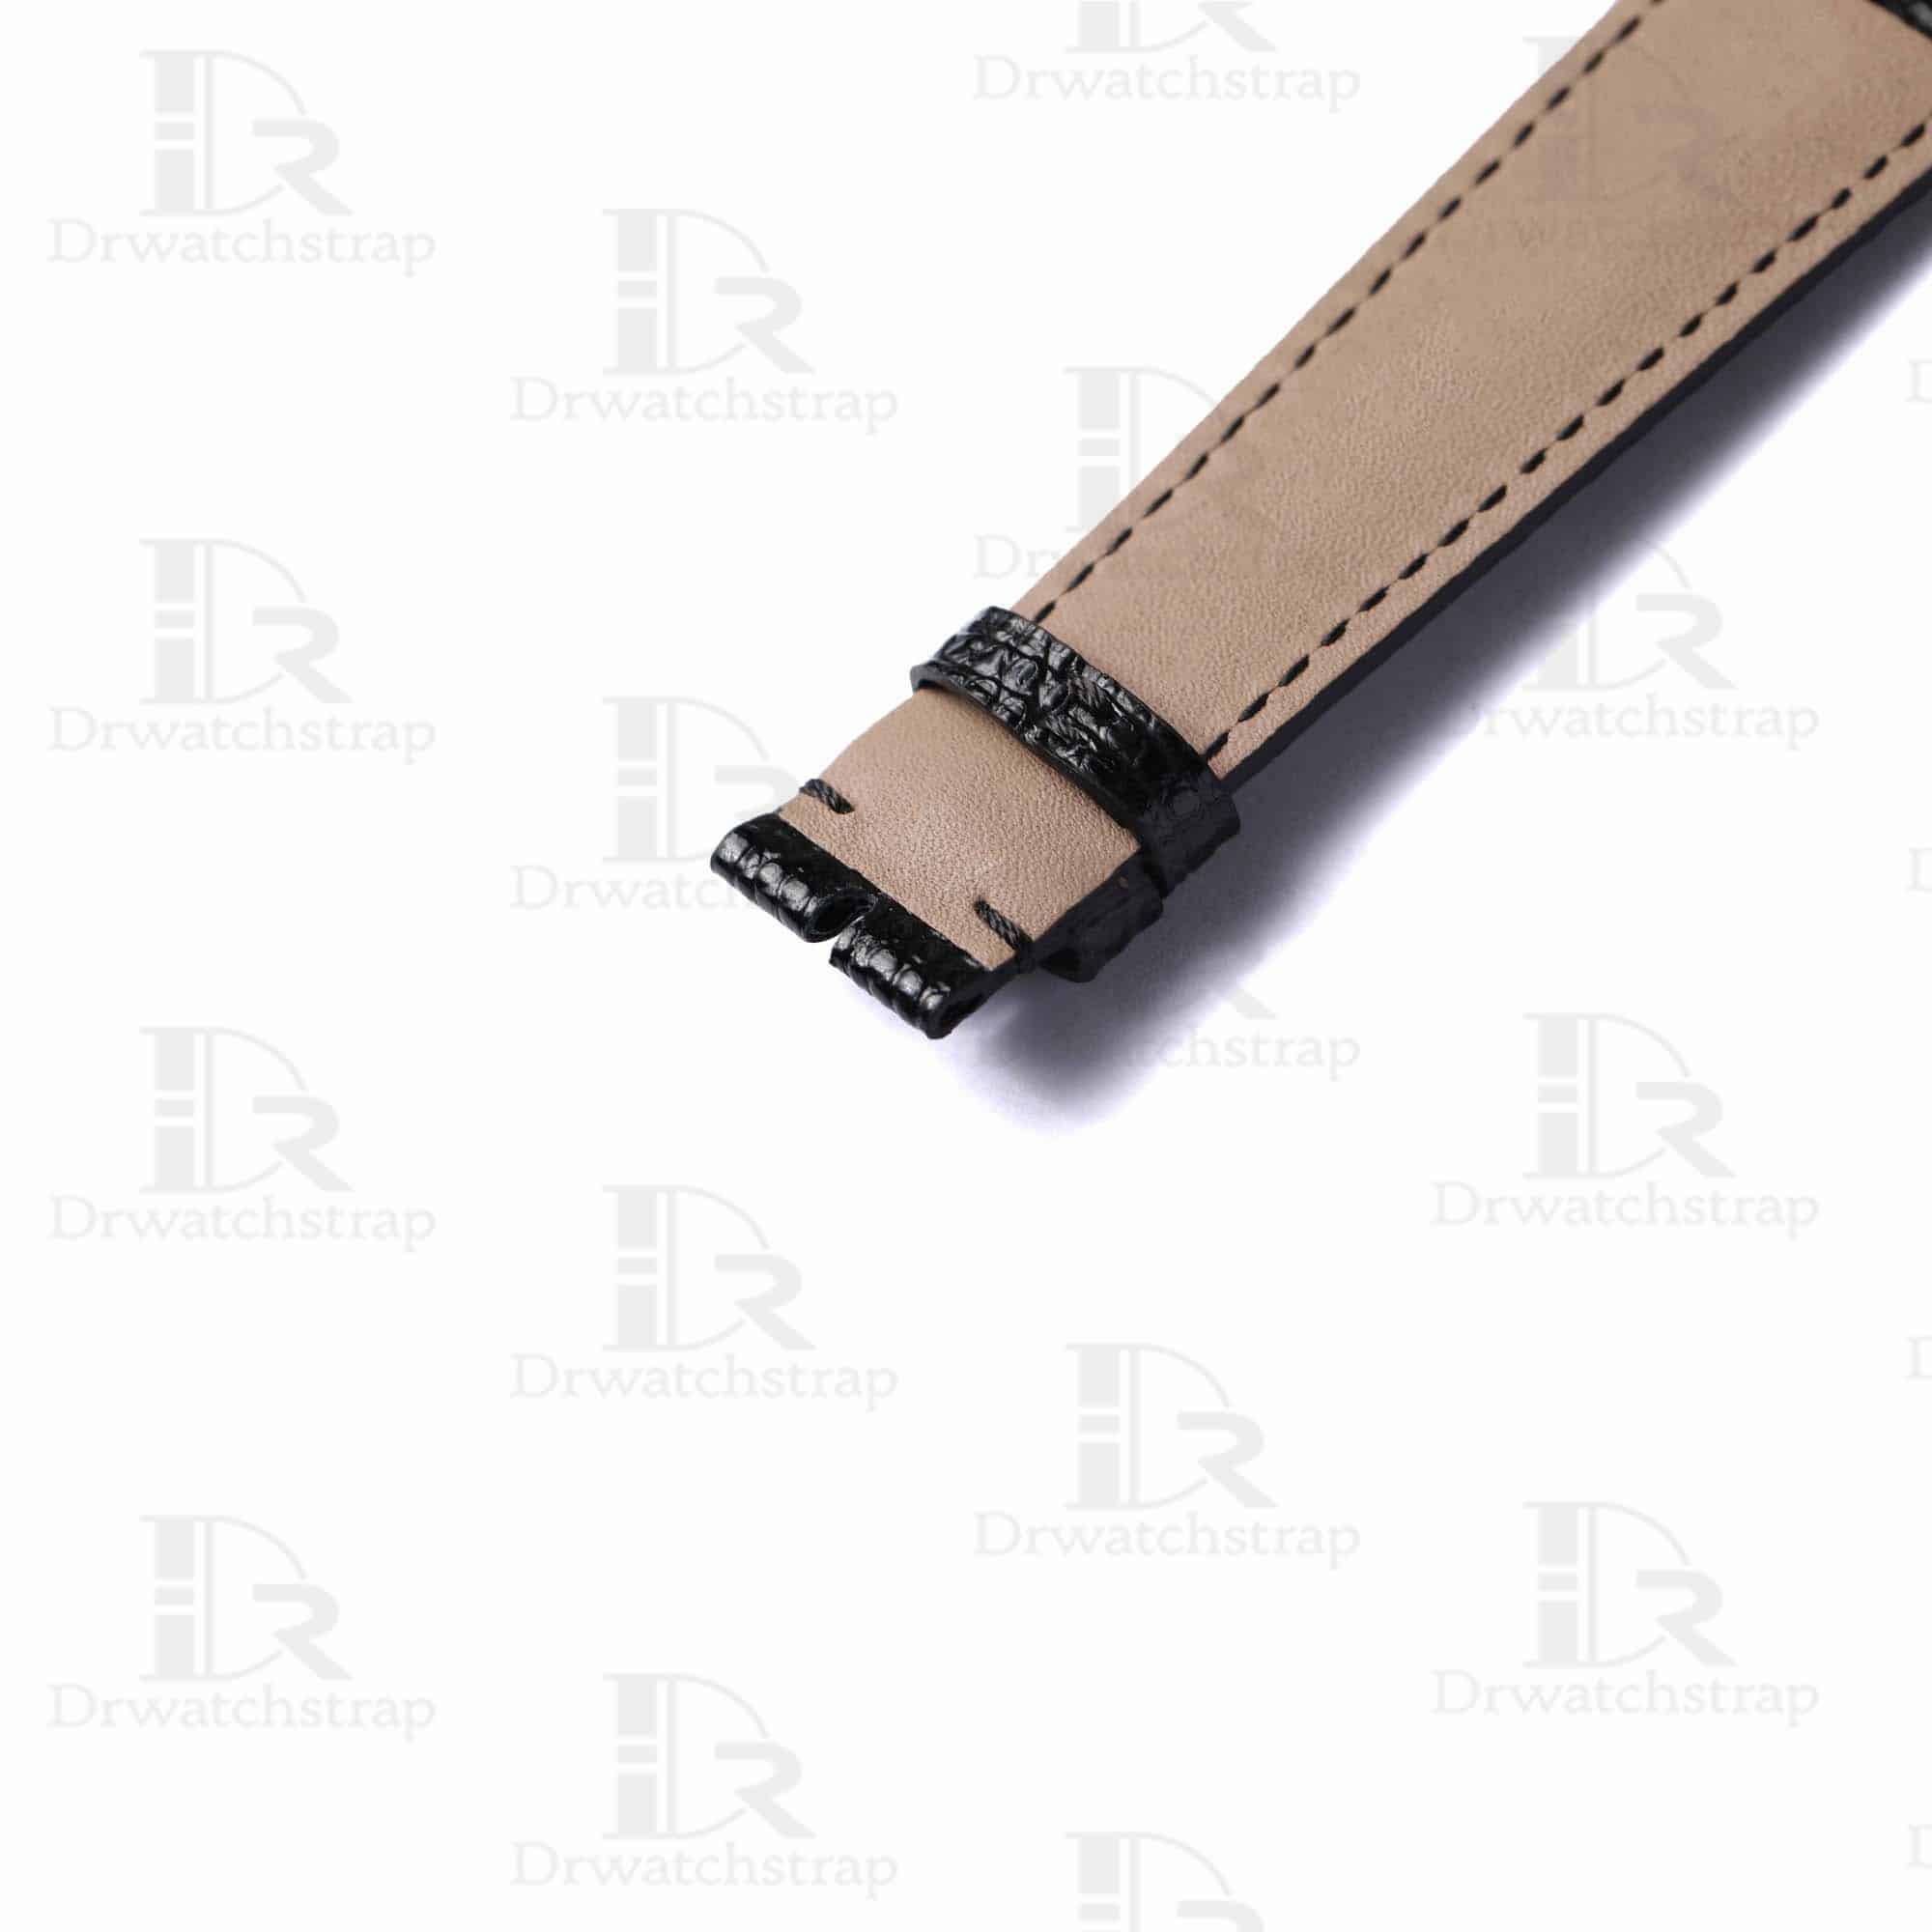 Shop the genuine best quality lizard skinleather material Black 20mm custom Rolex straps & watch bands replacement for Rolex luxury watches from DR watchstrap for sale at a low price - shop the premium Grade A leather watch strap and watch band online at a discount price